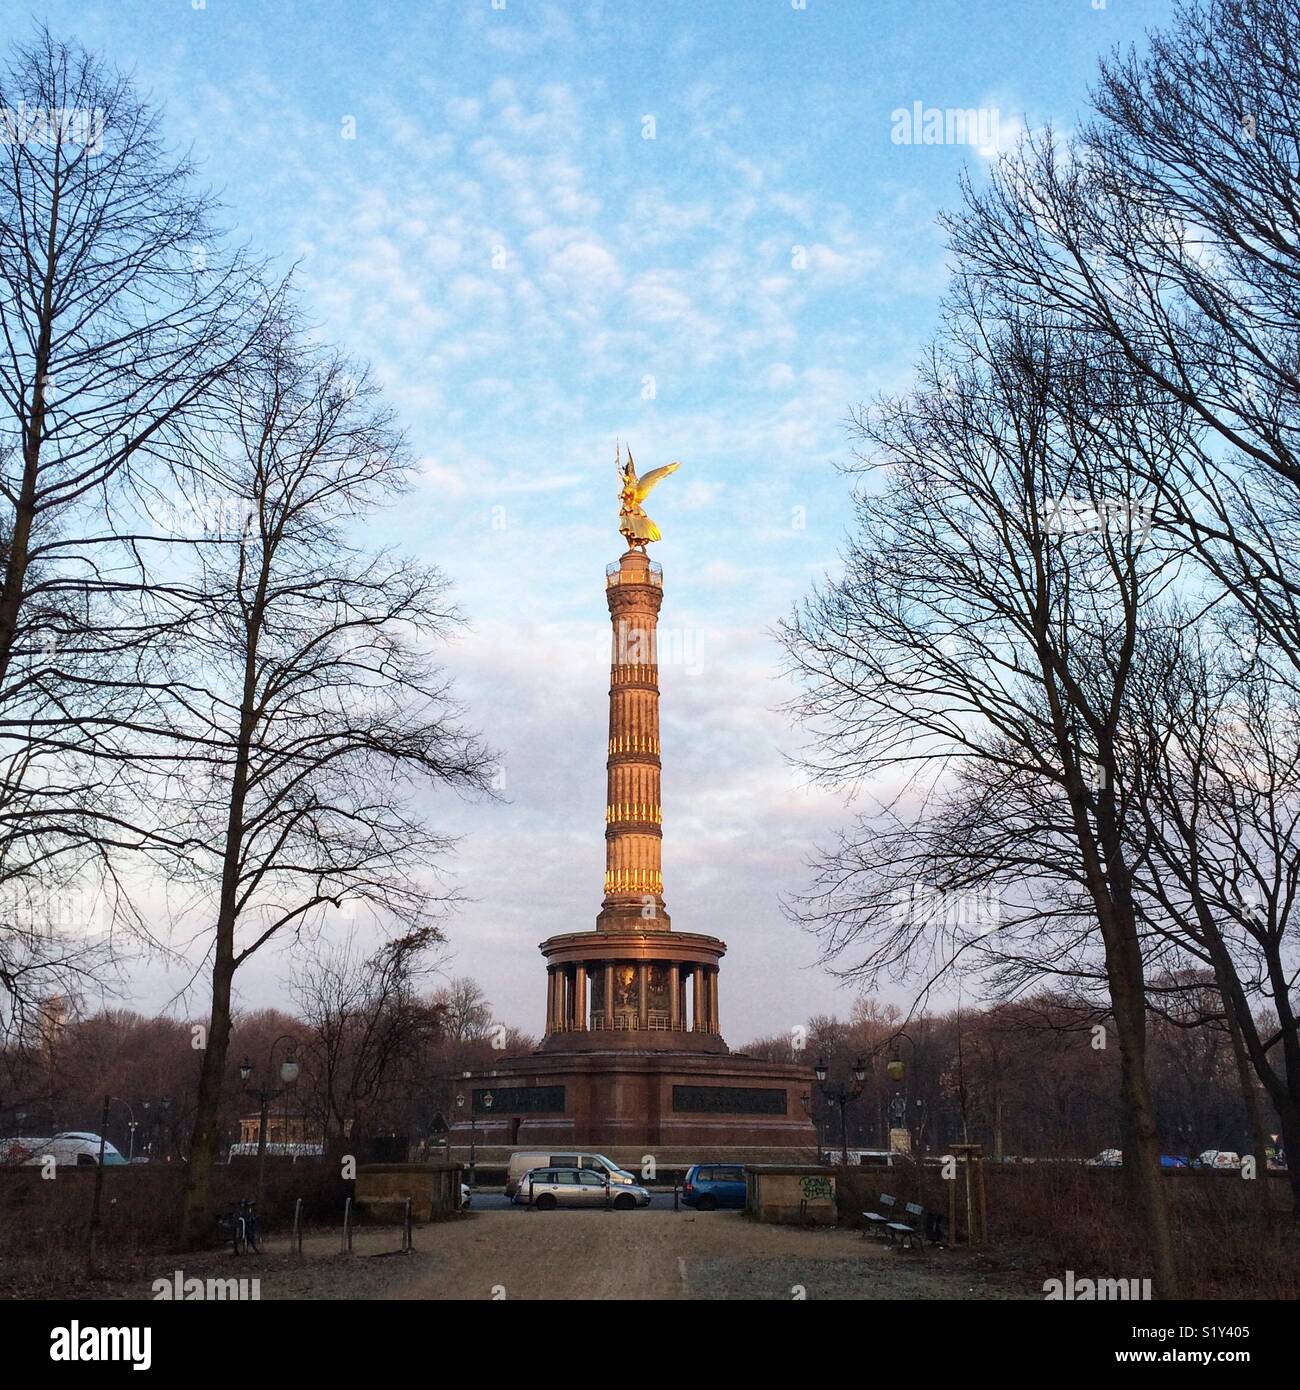 Victory monument, Berlin Stock Photo